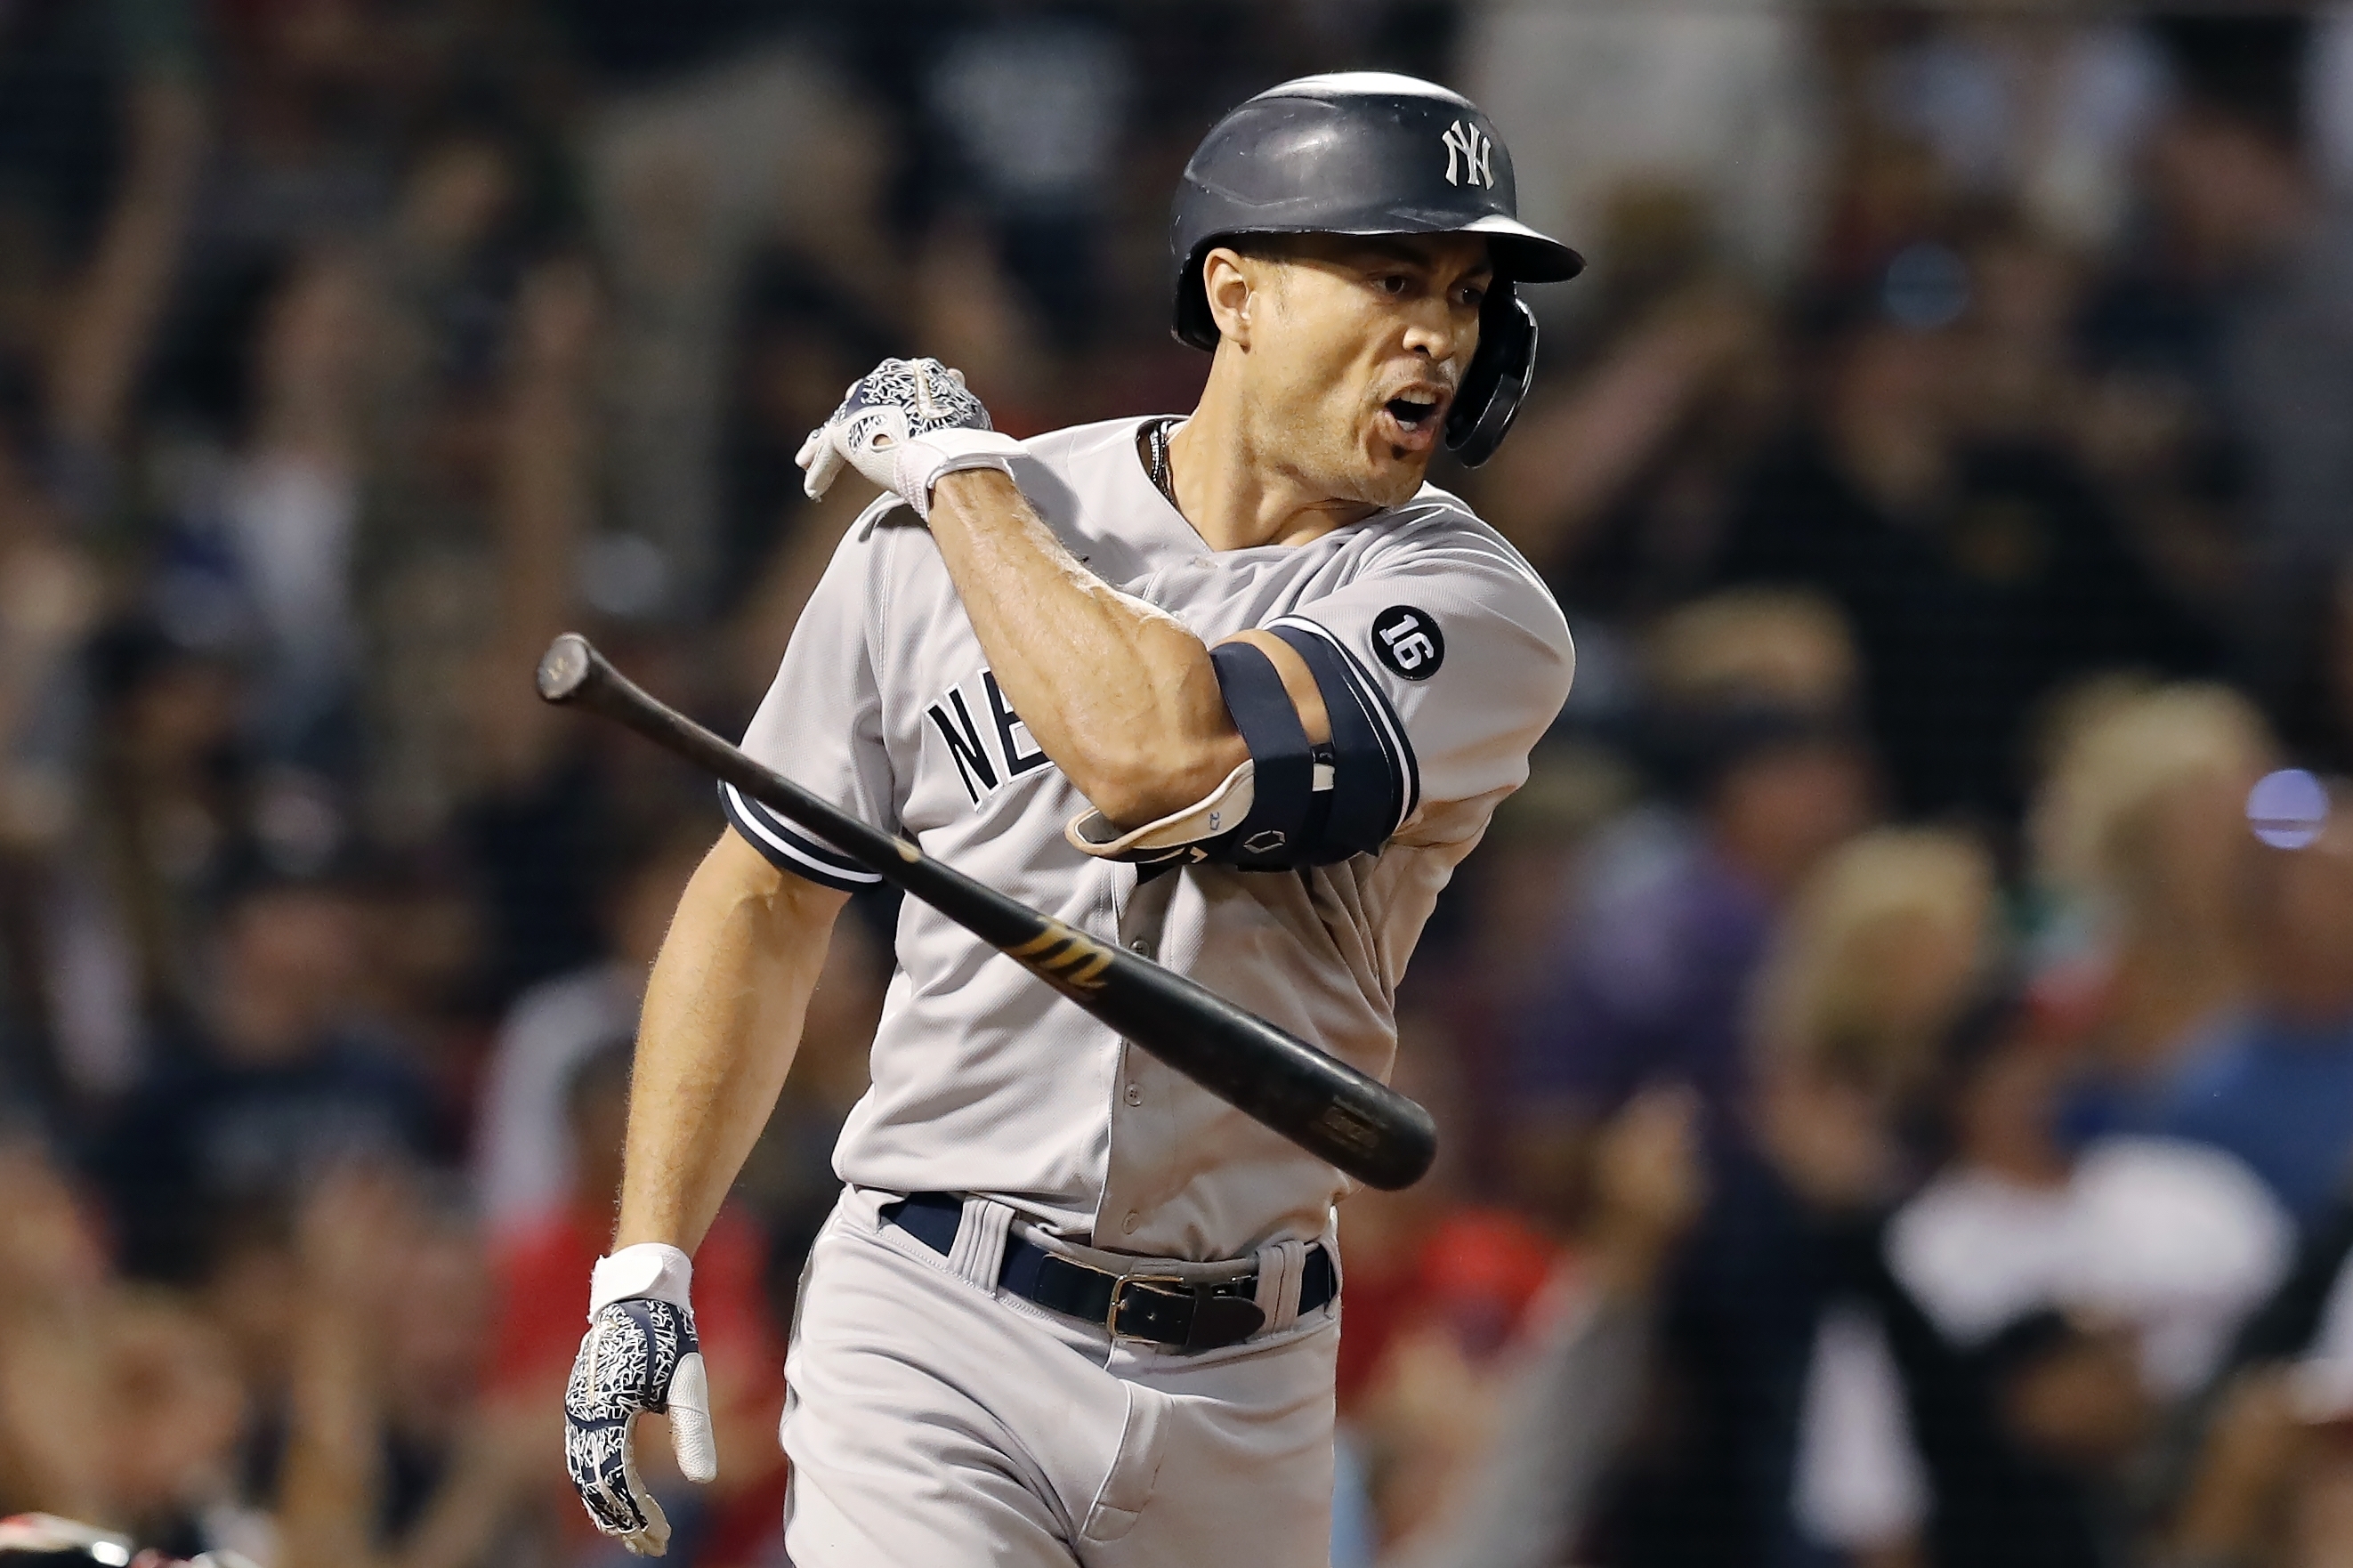 what has happened to GIANCARLO STANTON? sports vids on